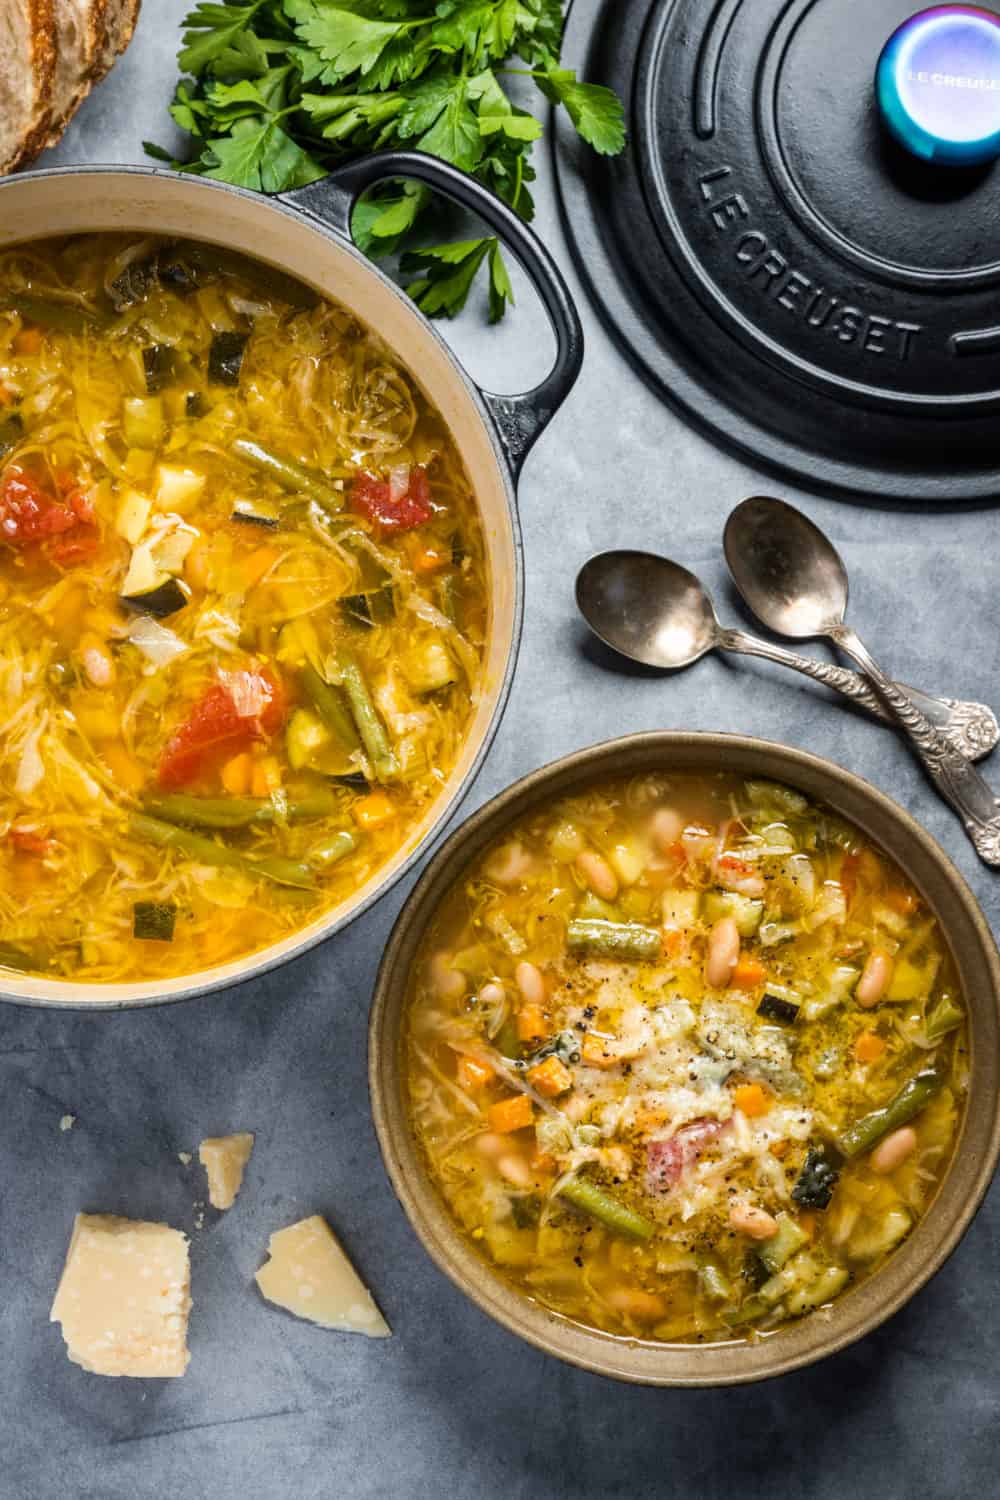 Minestrone Soup recipe from Rancho Gordo. Photography by James Collier